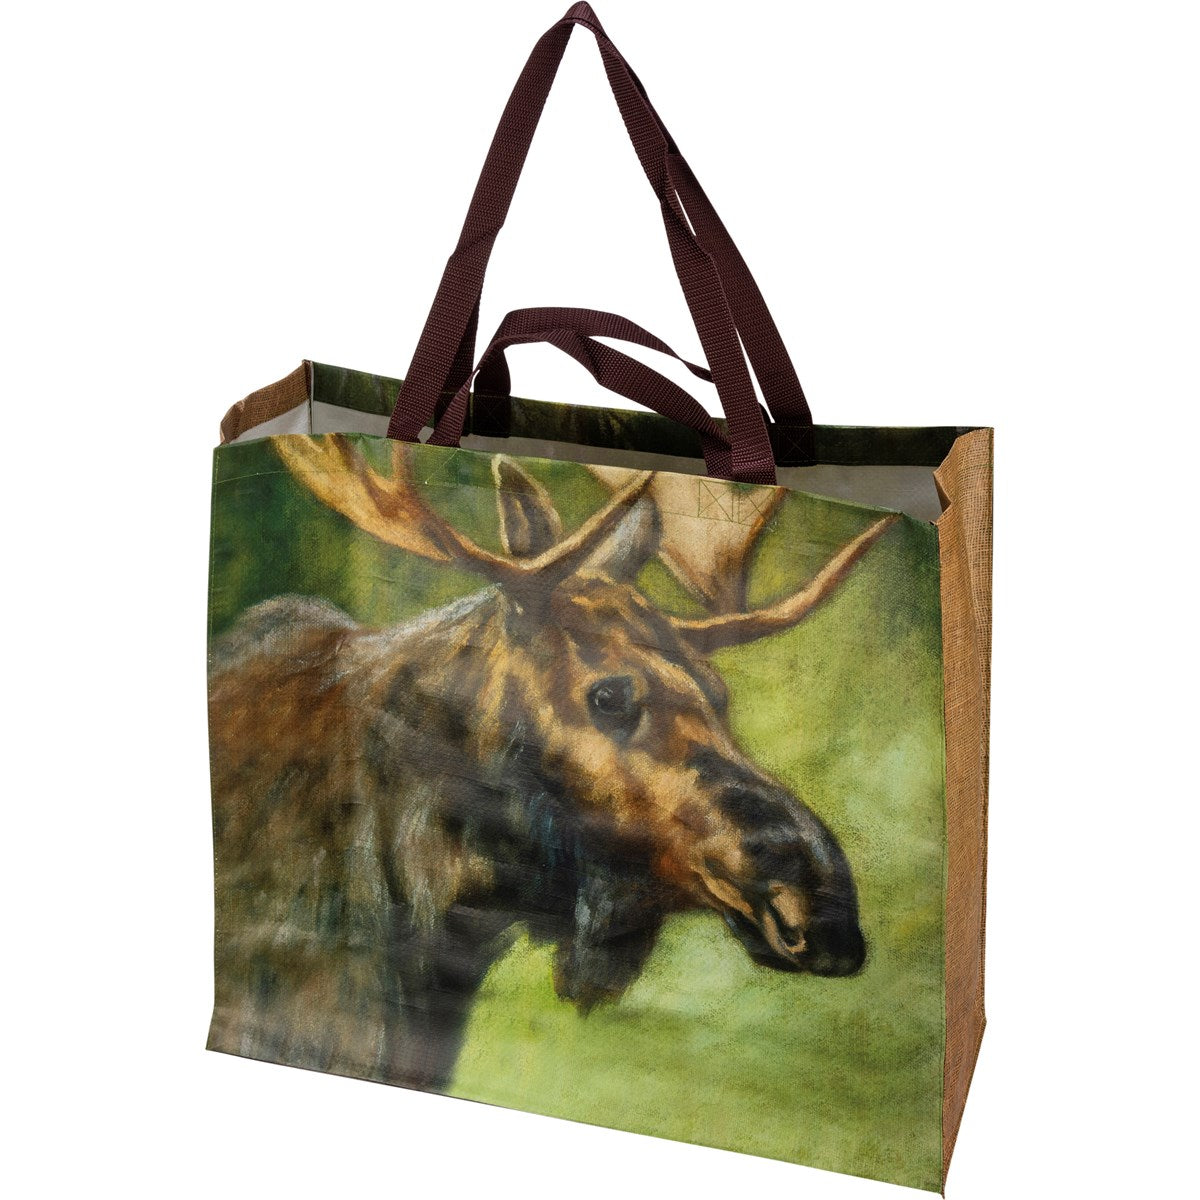 Woodland Deer and Moose Reusable Shopping Tote